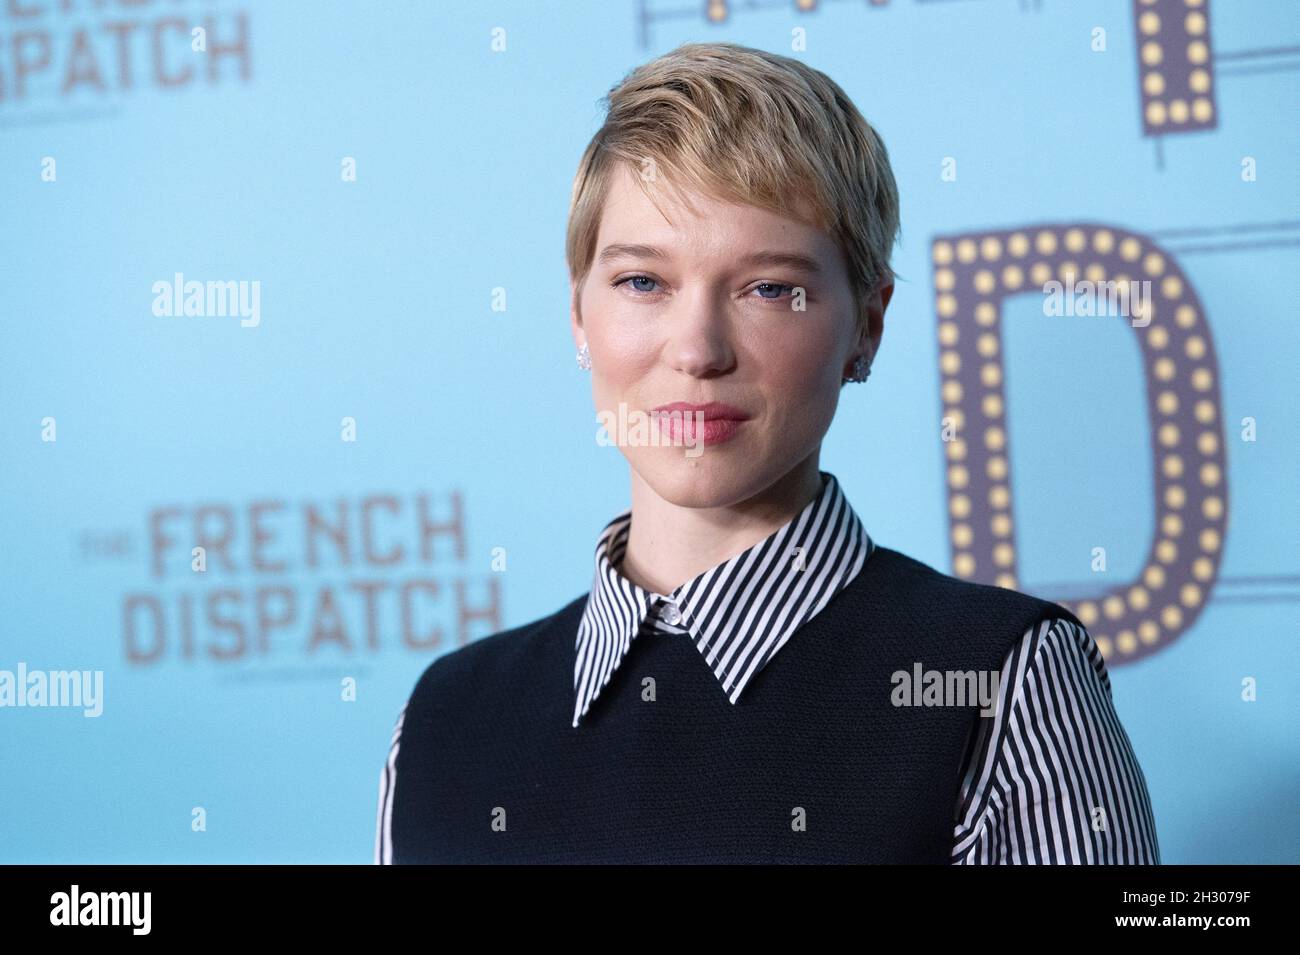 Paris, France on October 24, 2021. Lea Seydoux attending The French  Dispatch Premiere at the UGC Cine Cite Bercy in Paris, France on October  24, 2021. Photo by Aurore Marechal/ABACAPRESS.COM Stock Photo - Alamy